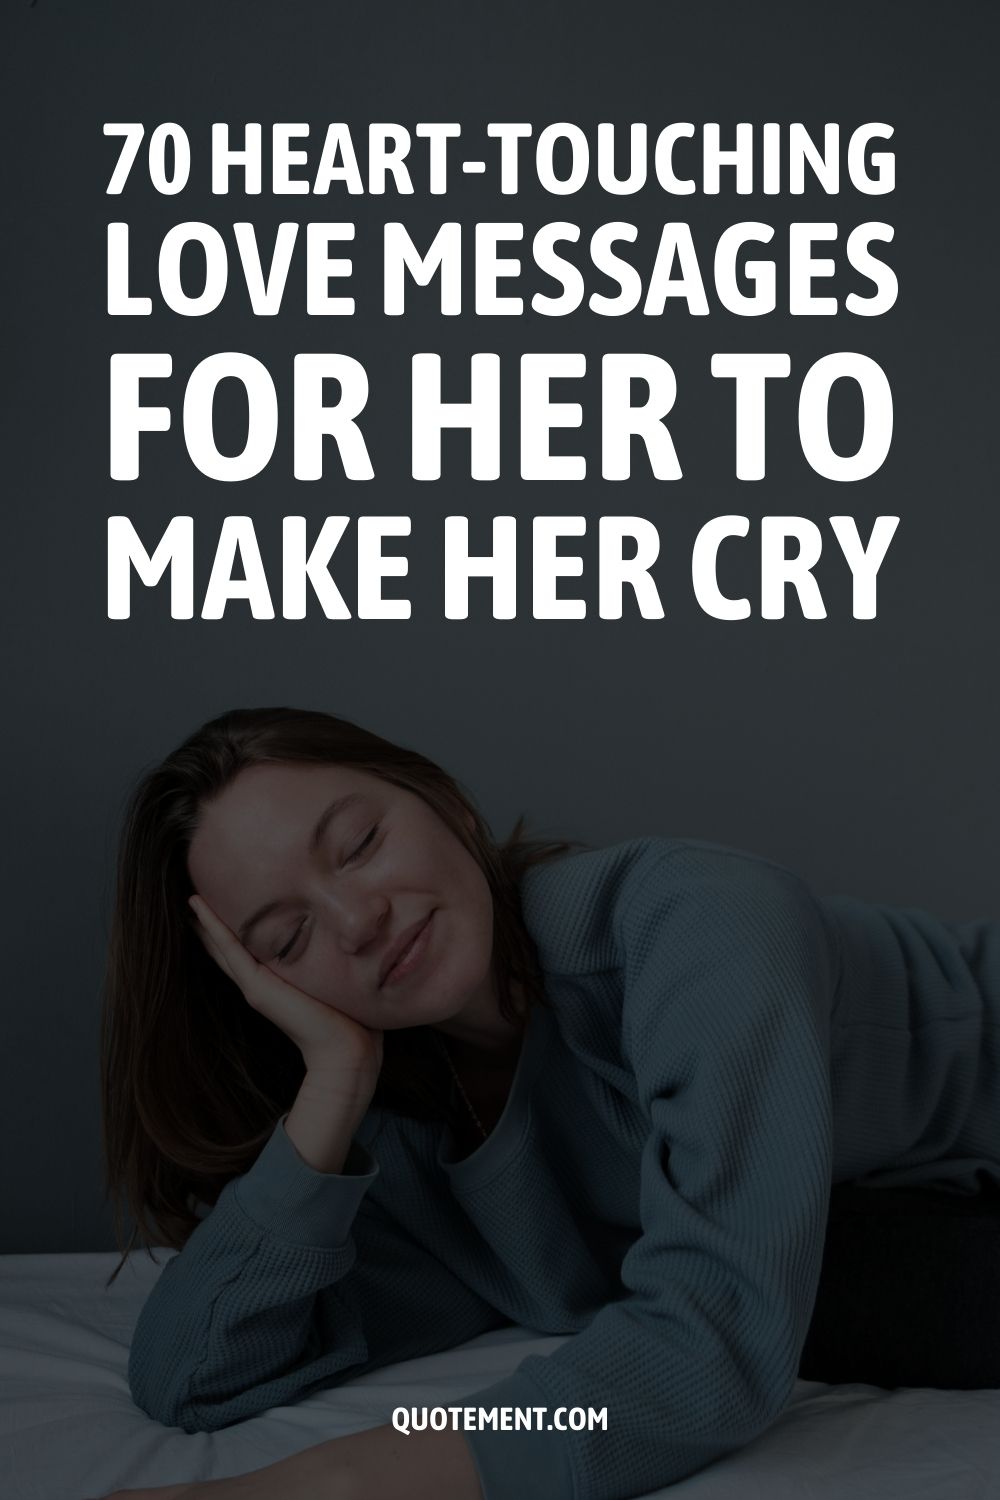 70 Heart-Touching Love Messages For Her To Make Her Cry 